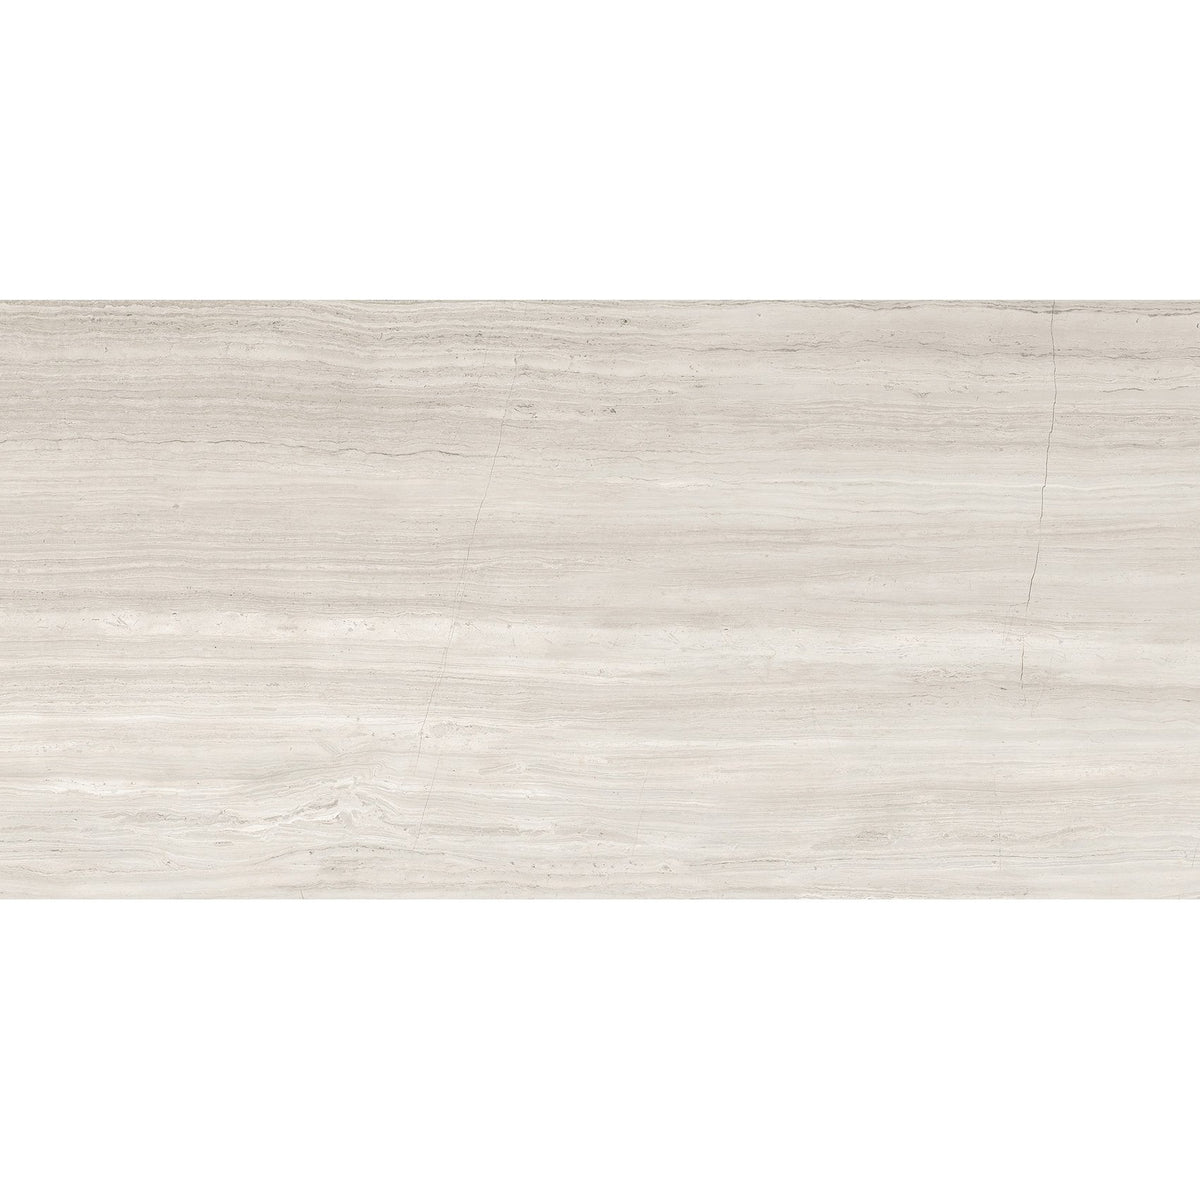 Anatolia Mayfair 12 in. x 24 in. HD Rectified Porcelain Tile - Strada Ash (Polished)